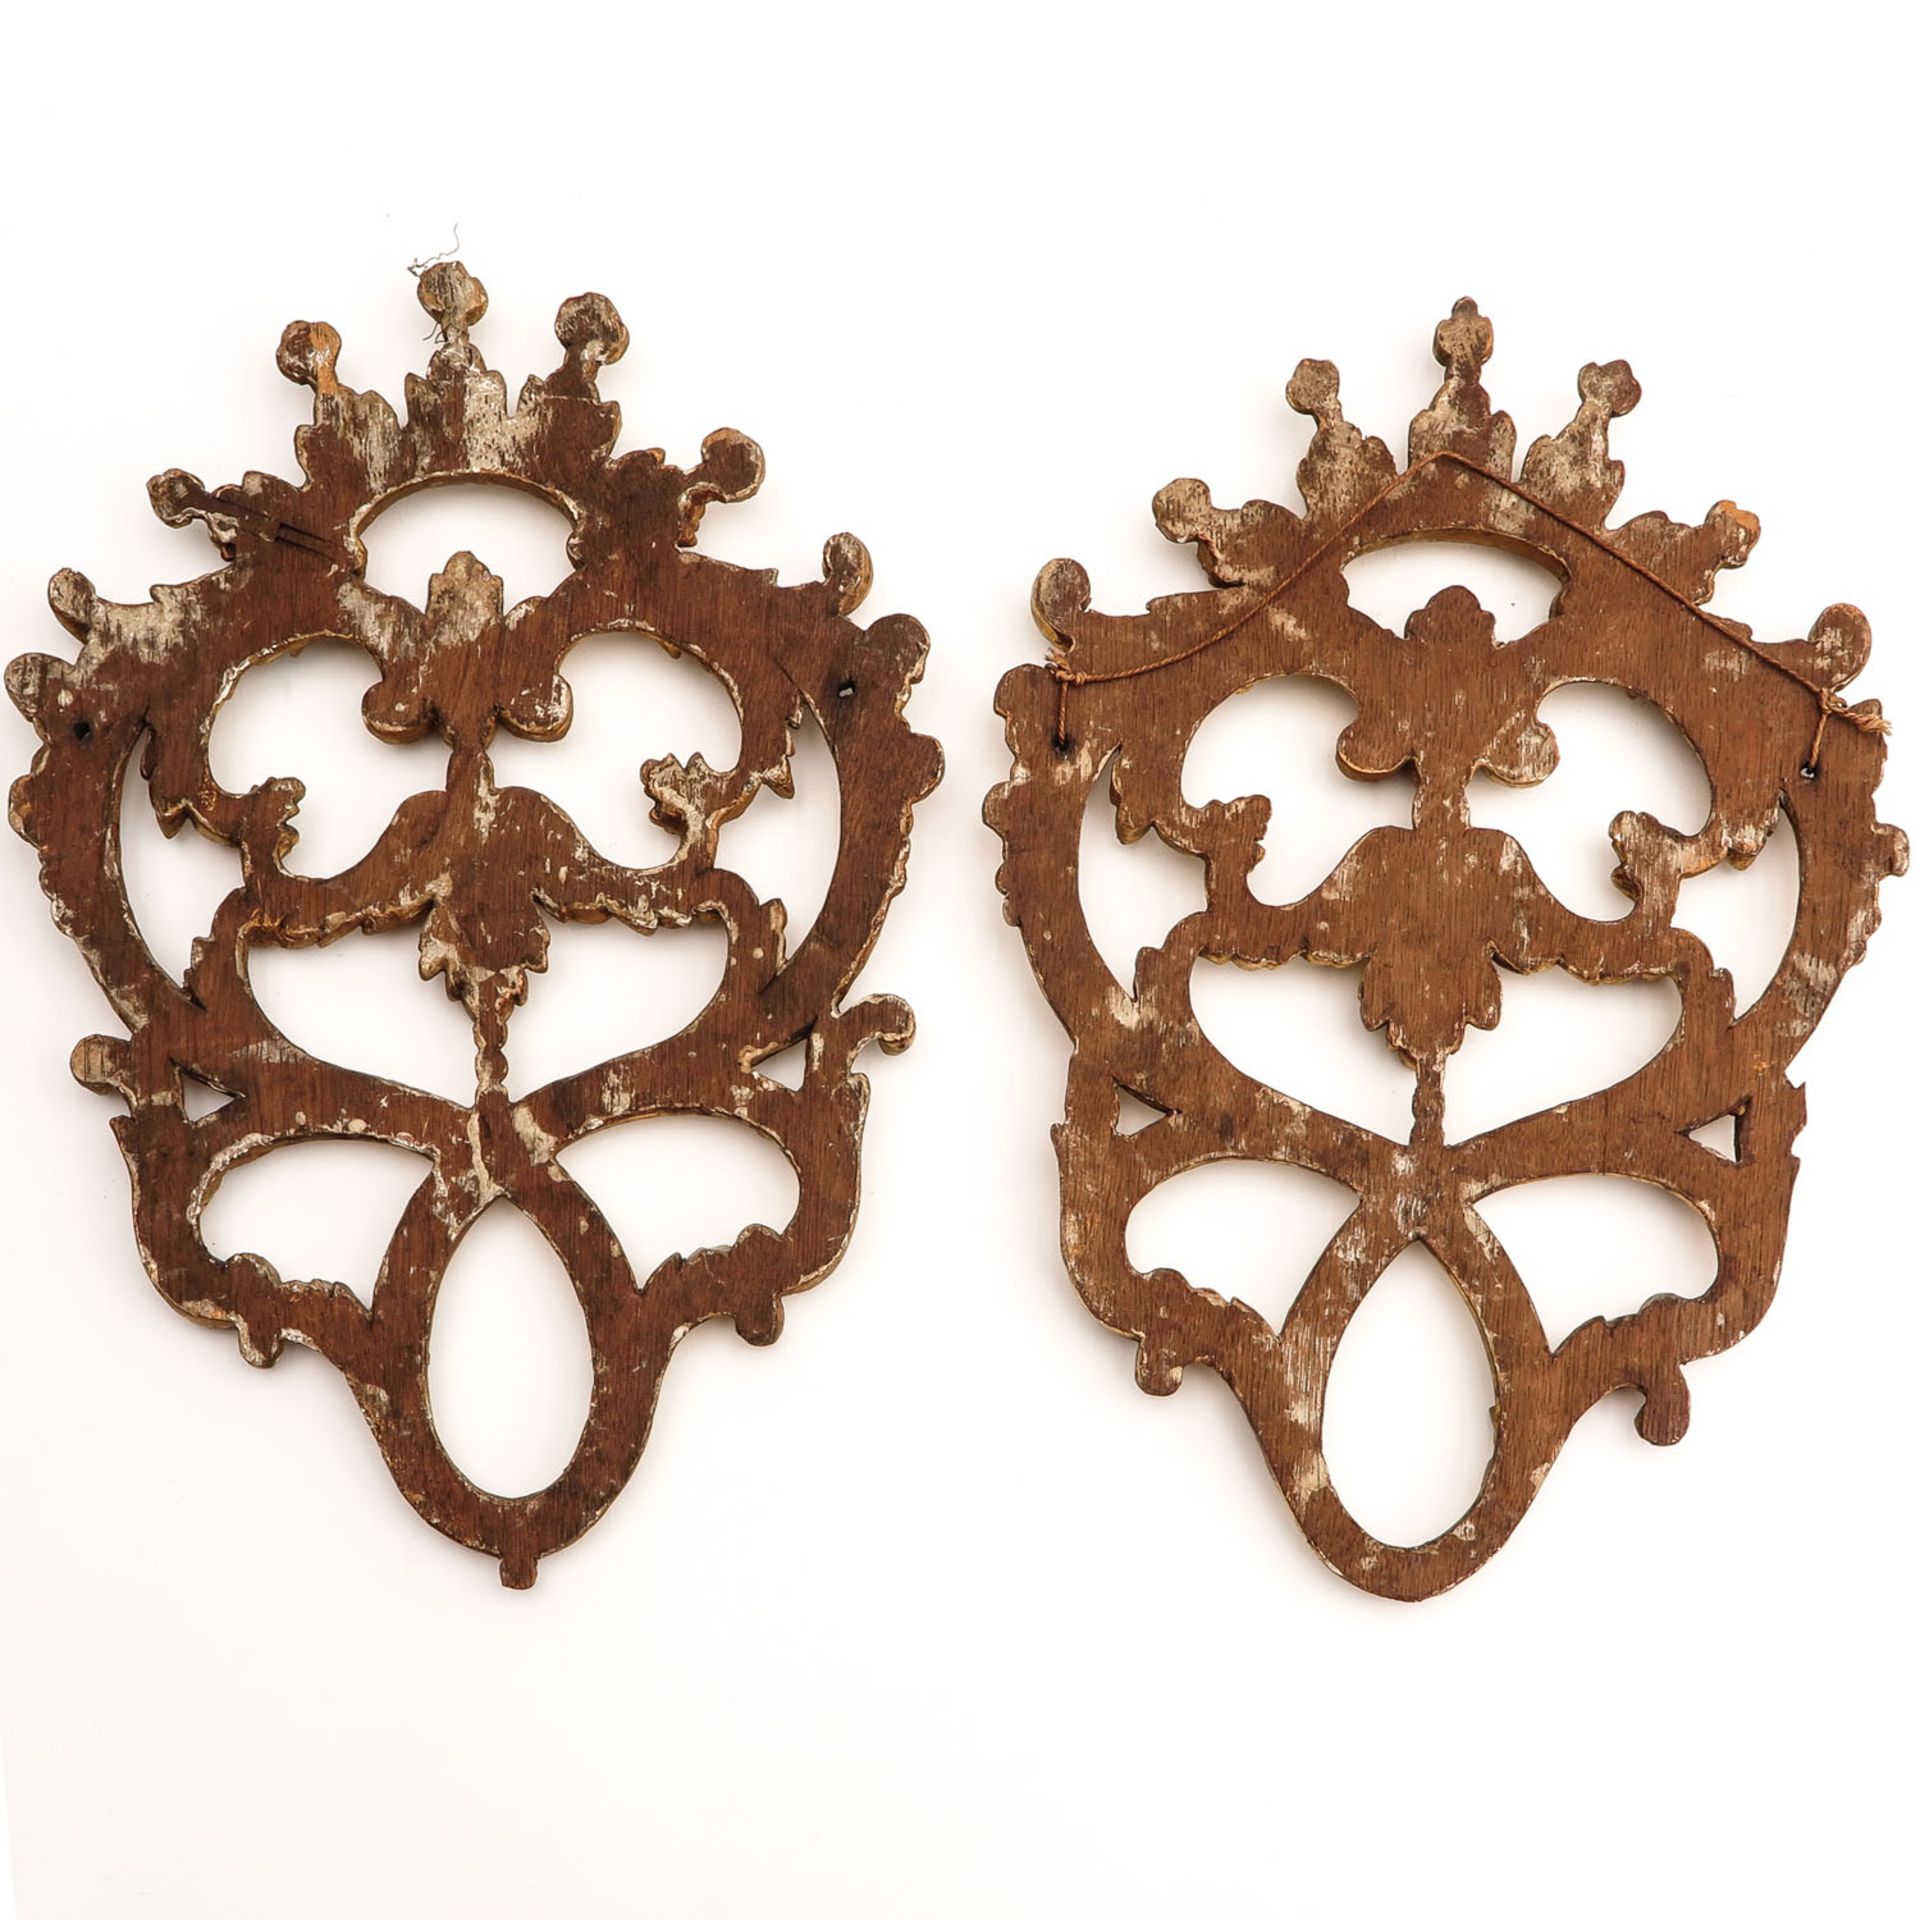 A Lot of 2 18th - 19th Century Wood Ornaments - Image 2 of 10